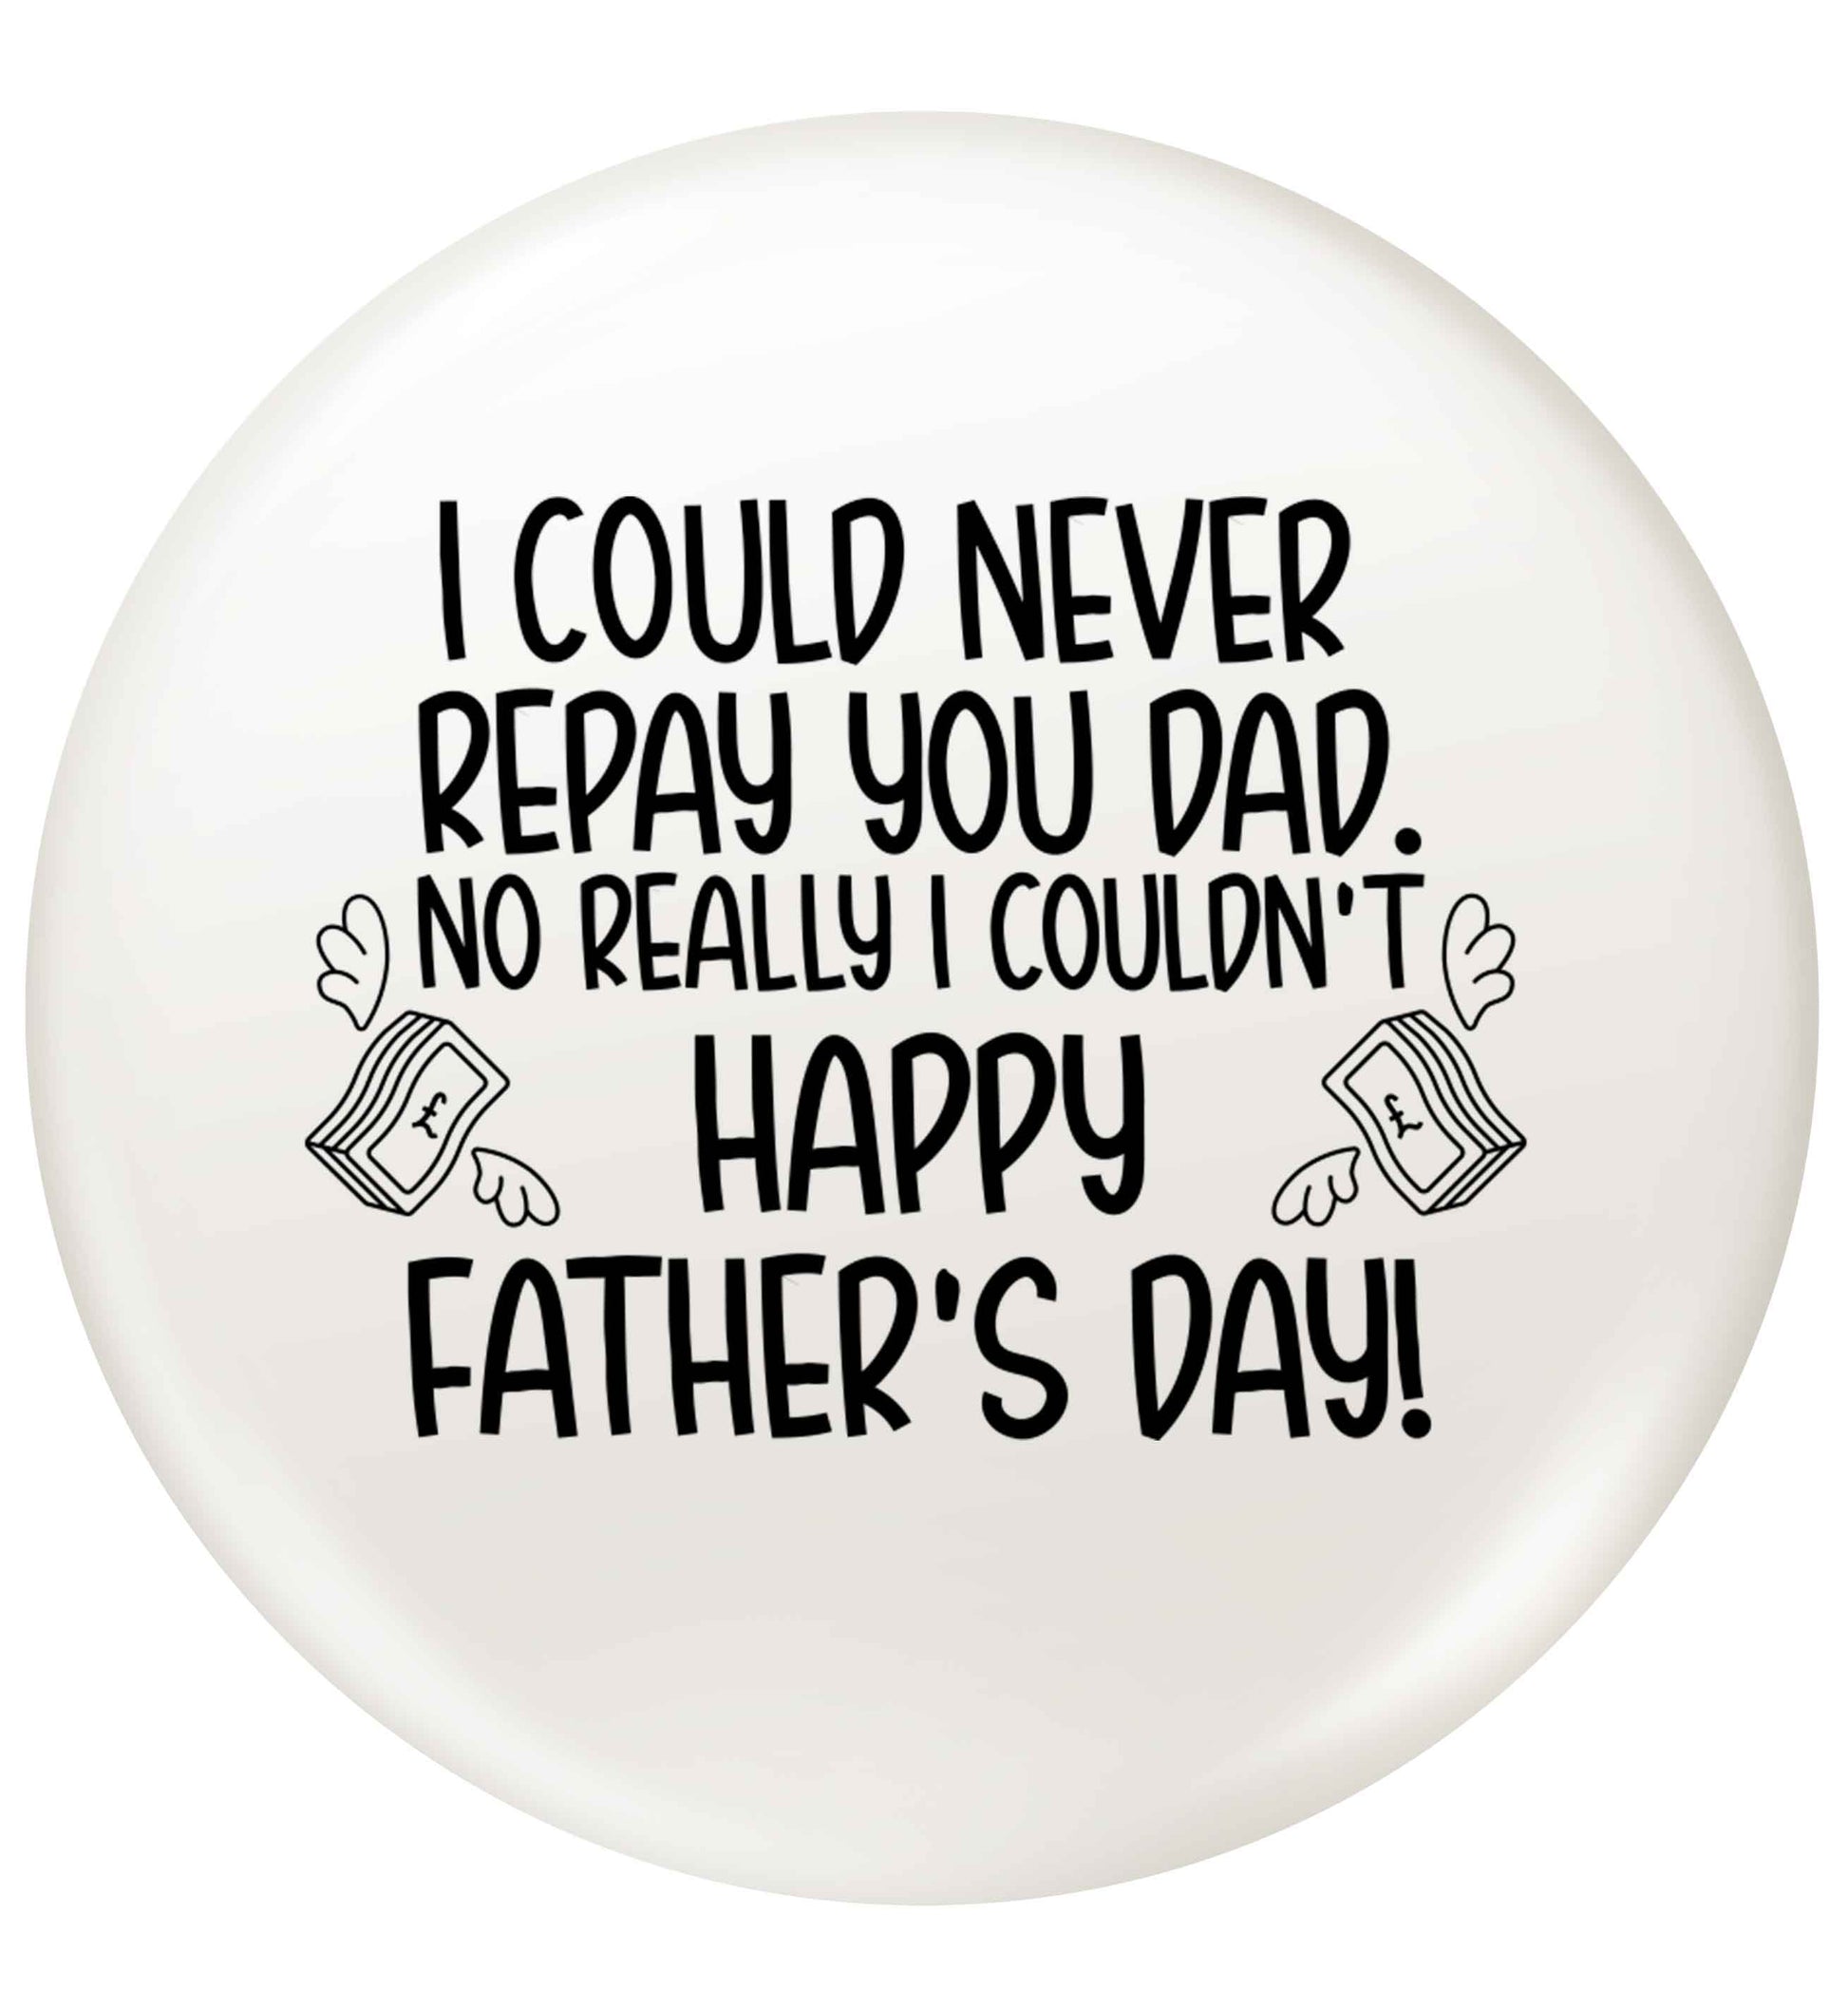 I could never repay you dad. No I really couldn't happy Father's day! small 25mm Pin badge